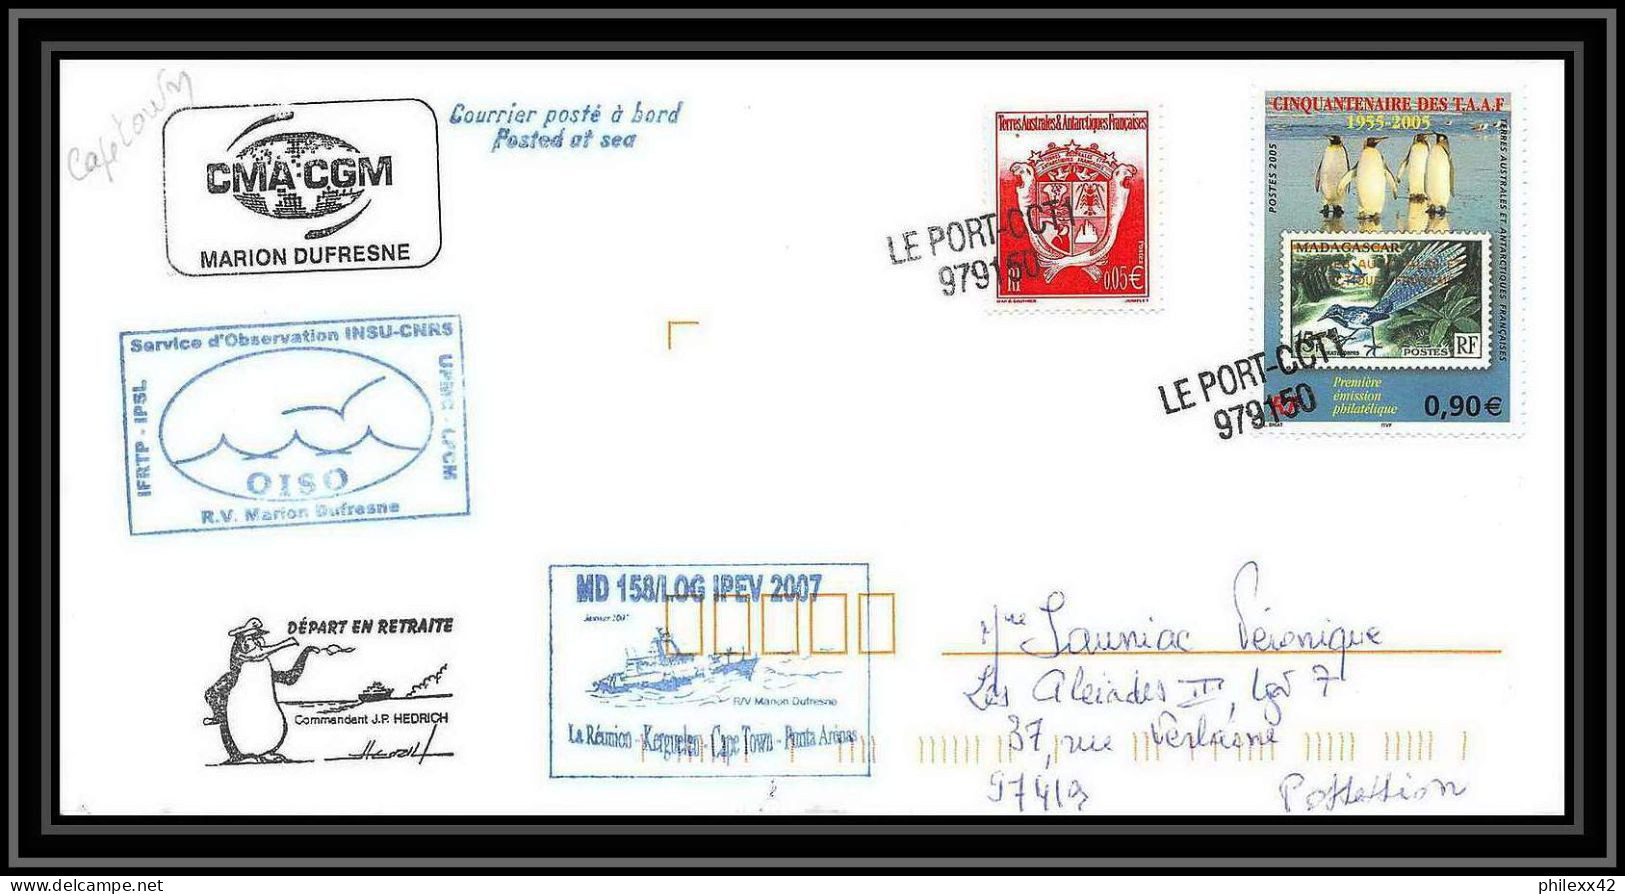 2652 ANTARCTIC Terres Australes TAAF Lettre Cover Dufresne 2 Md 158 Cape Town 5/2/2007 N°430 Possession Reunion - Antarctic Expeditions